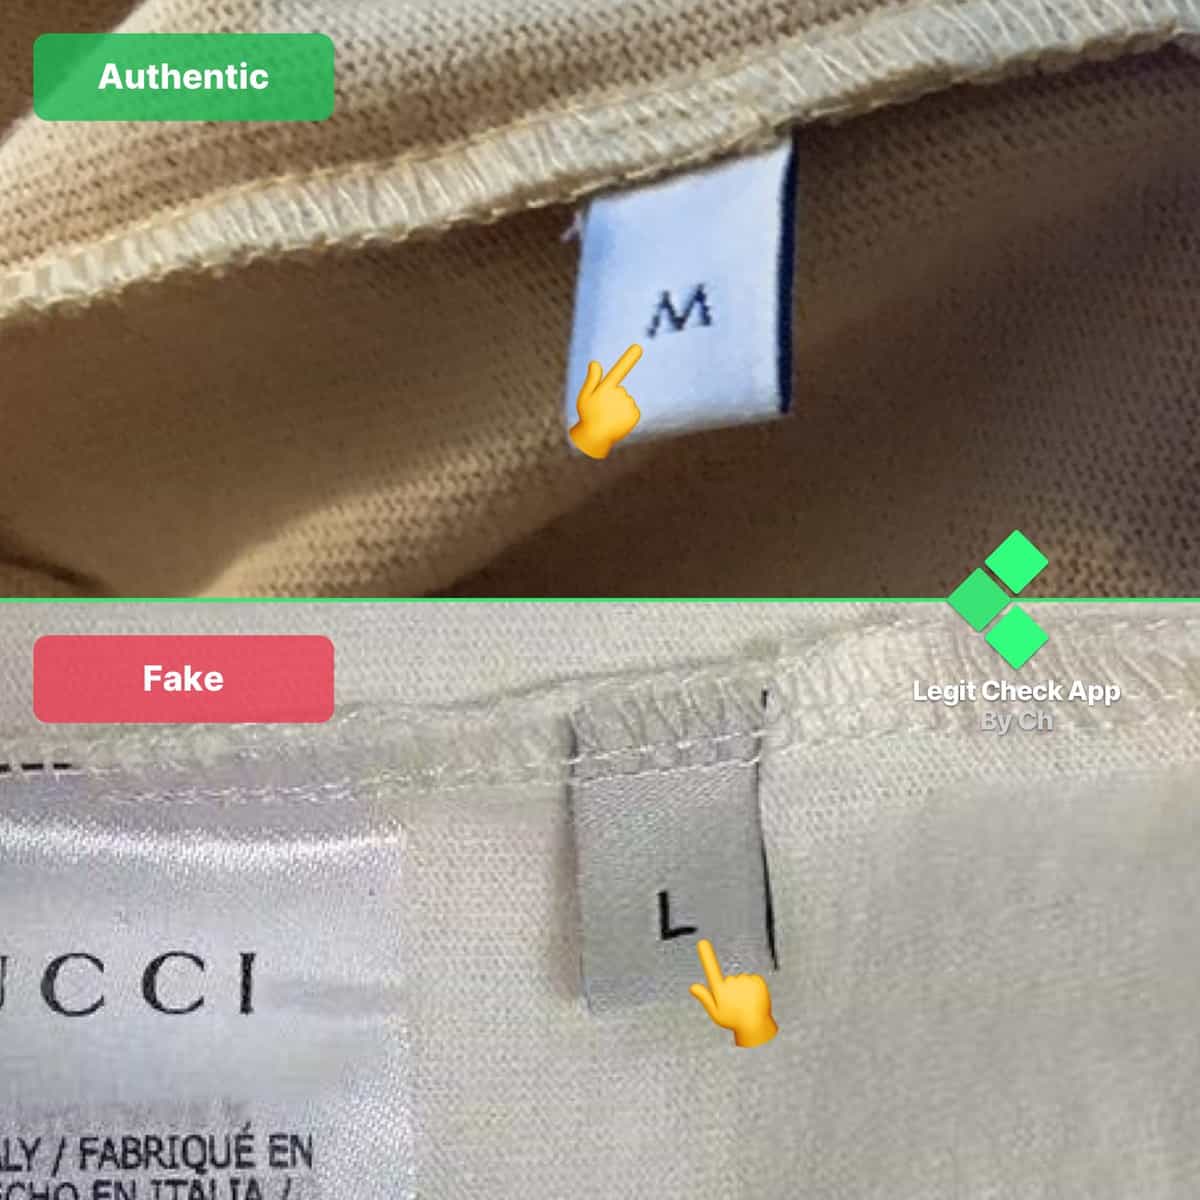 Gucci The North Face T Shirt Fake Vs Real Guide How To Spot Fake Gucci Tnf Legit Check By Ch